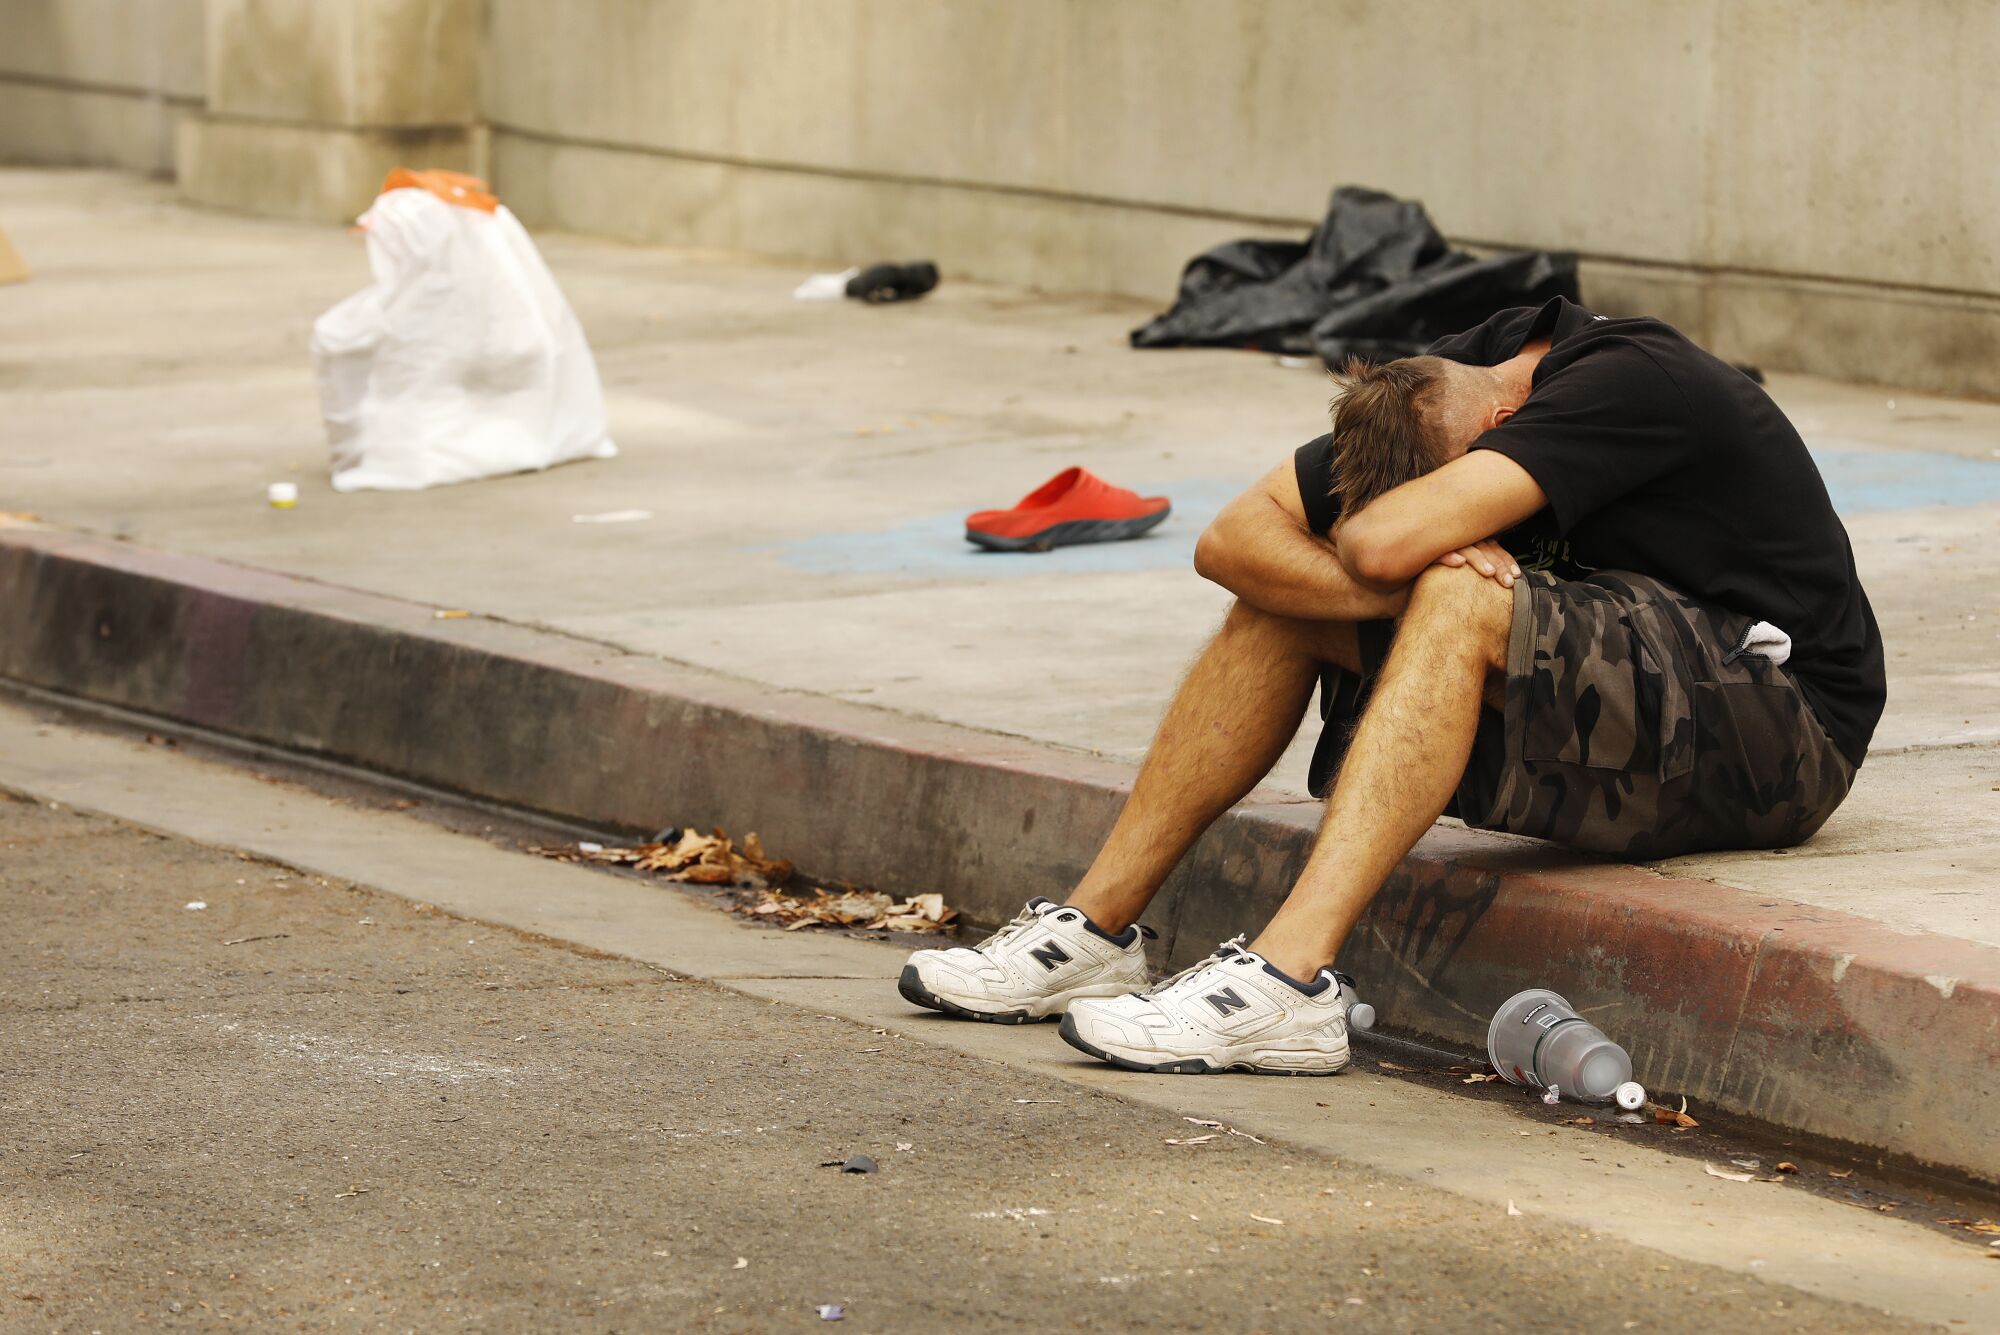 A man sitting on a curb has his head down between his arms and legs.